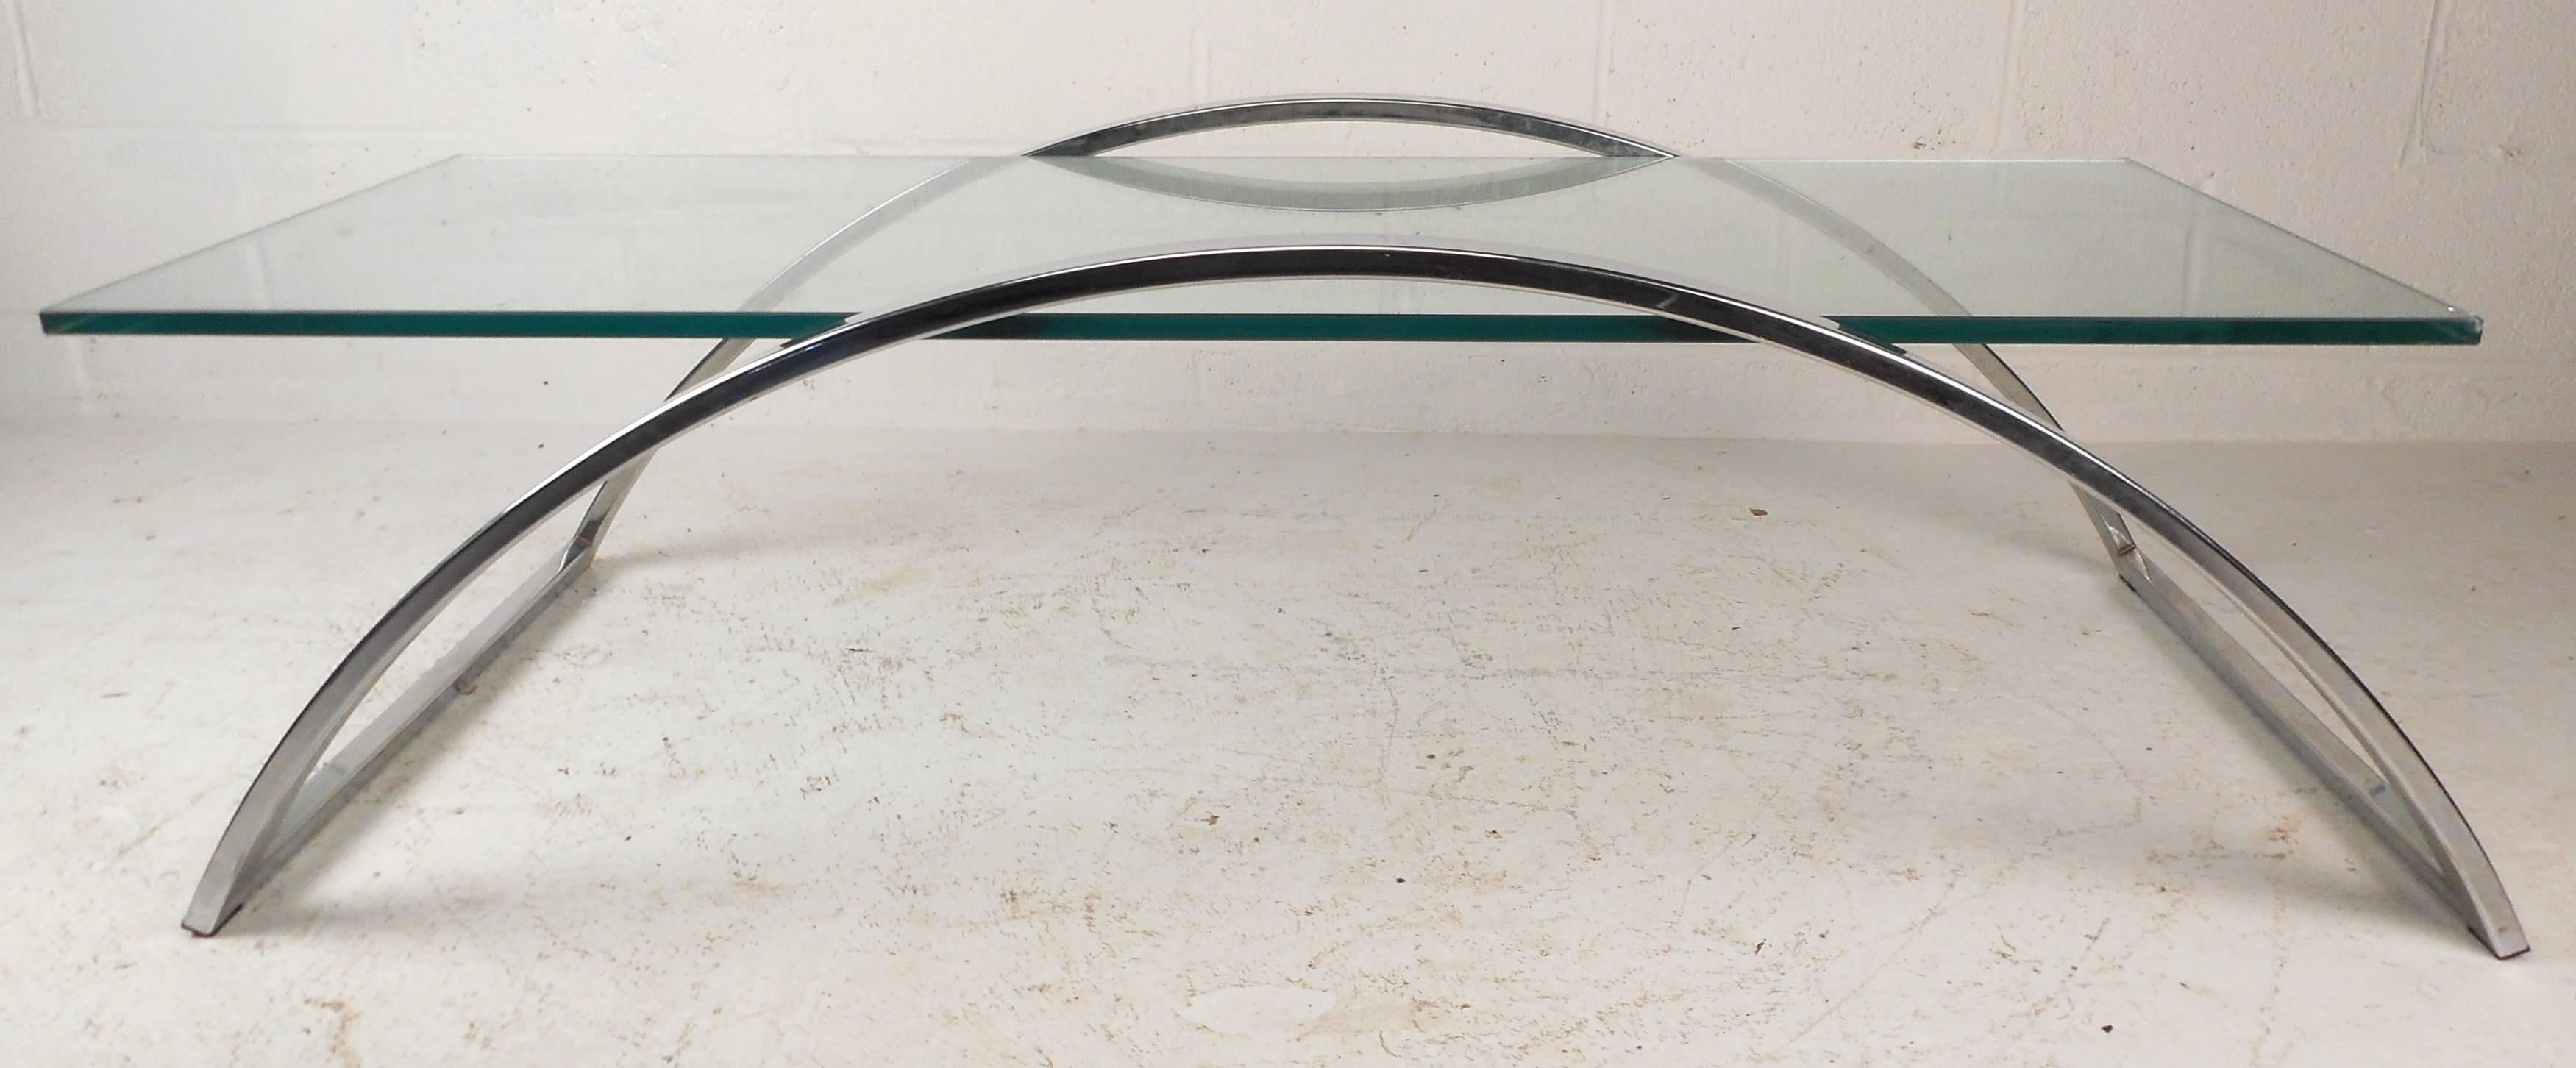 This stunning Mid-Century Modern coffee table features an arched frame of heavy chrome with a thick glass top. The unique base compliments the floating glass top, providing a stylish vintage look great for any setting. Please confirm item location